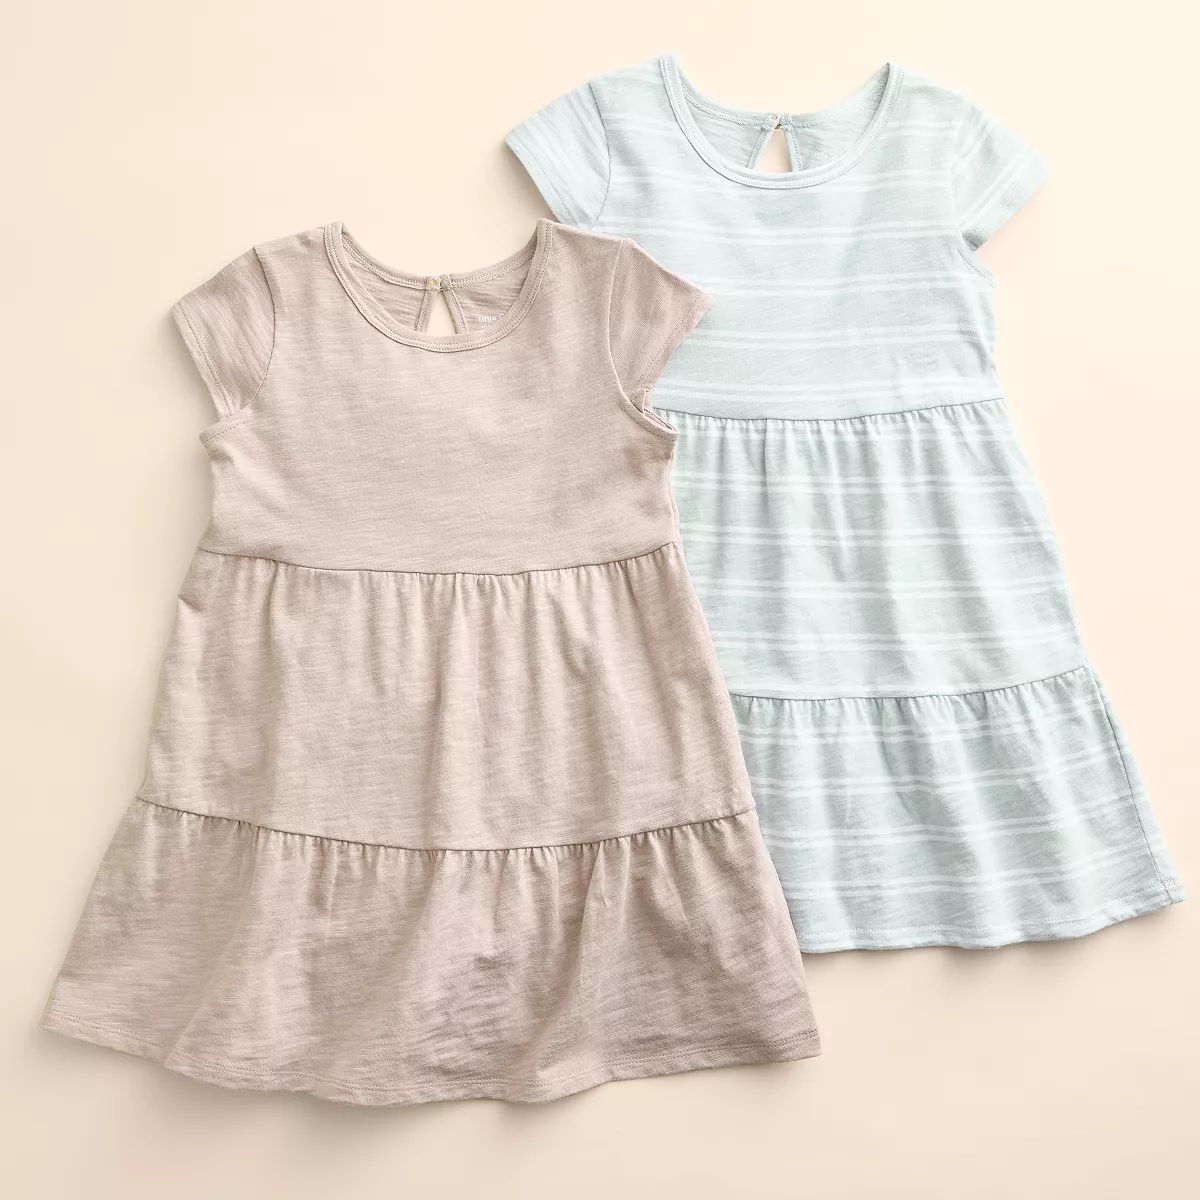 Girls 4-12 Little Co. by Lauren Conrad 2-Pack Organic Tiered Dresses | Kohl's